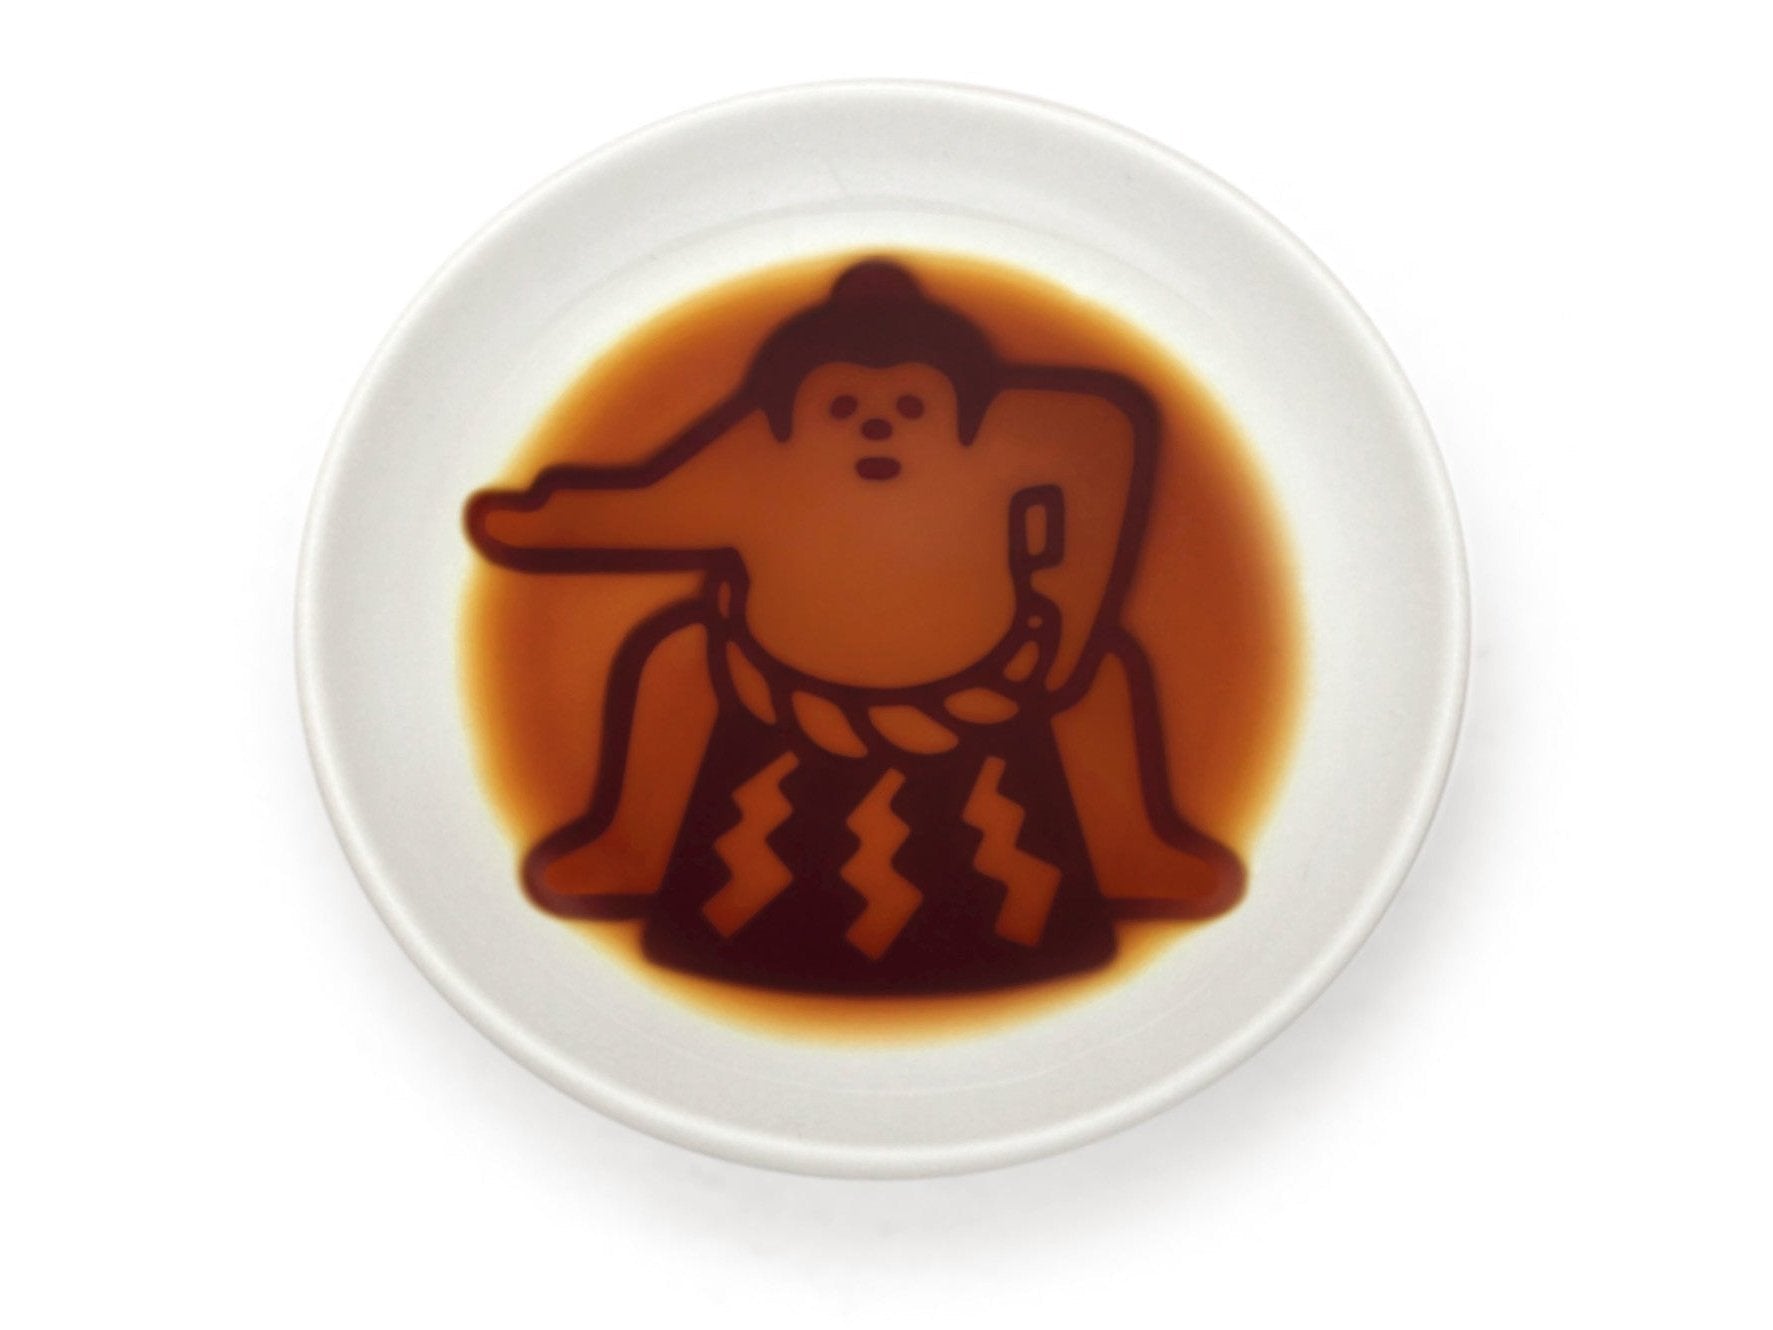 Aruta Sumo Soy Sauce Plate